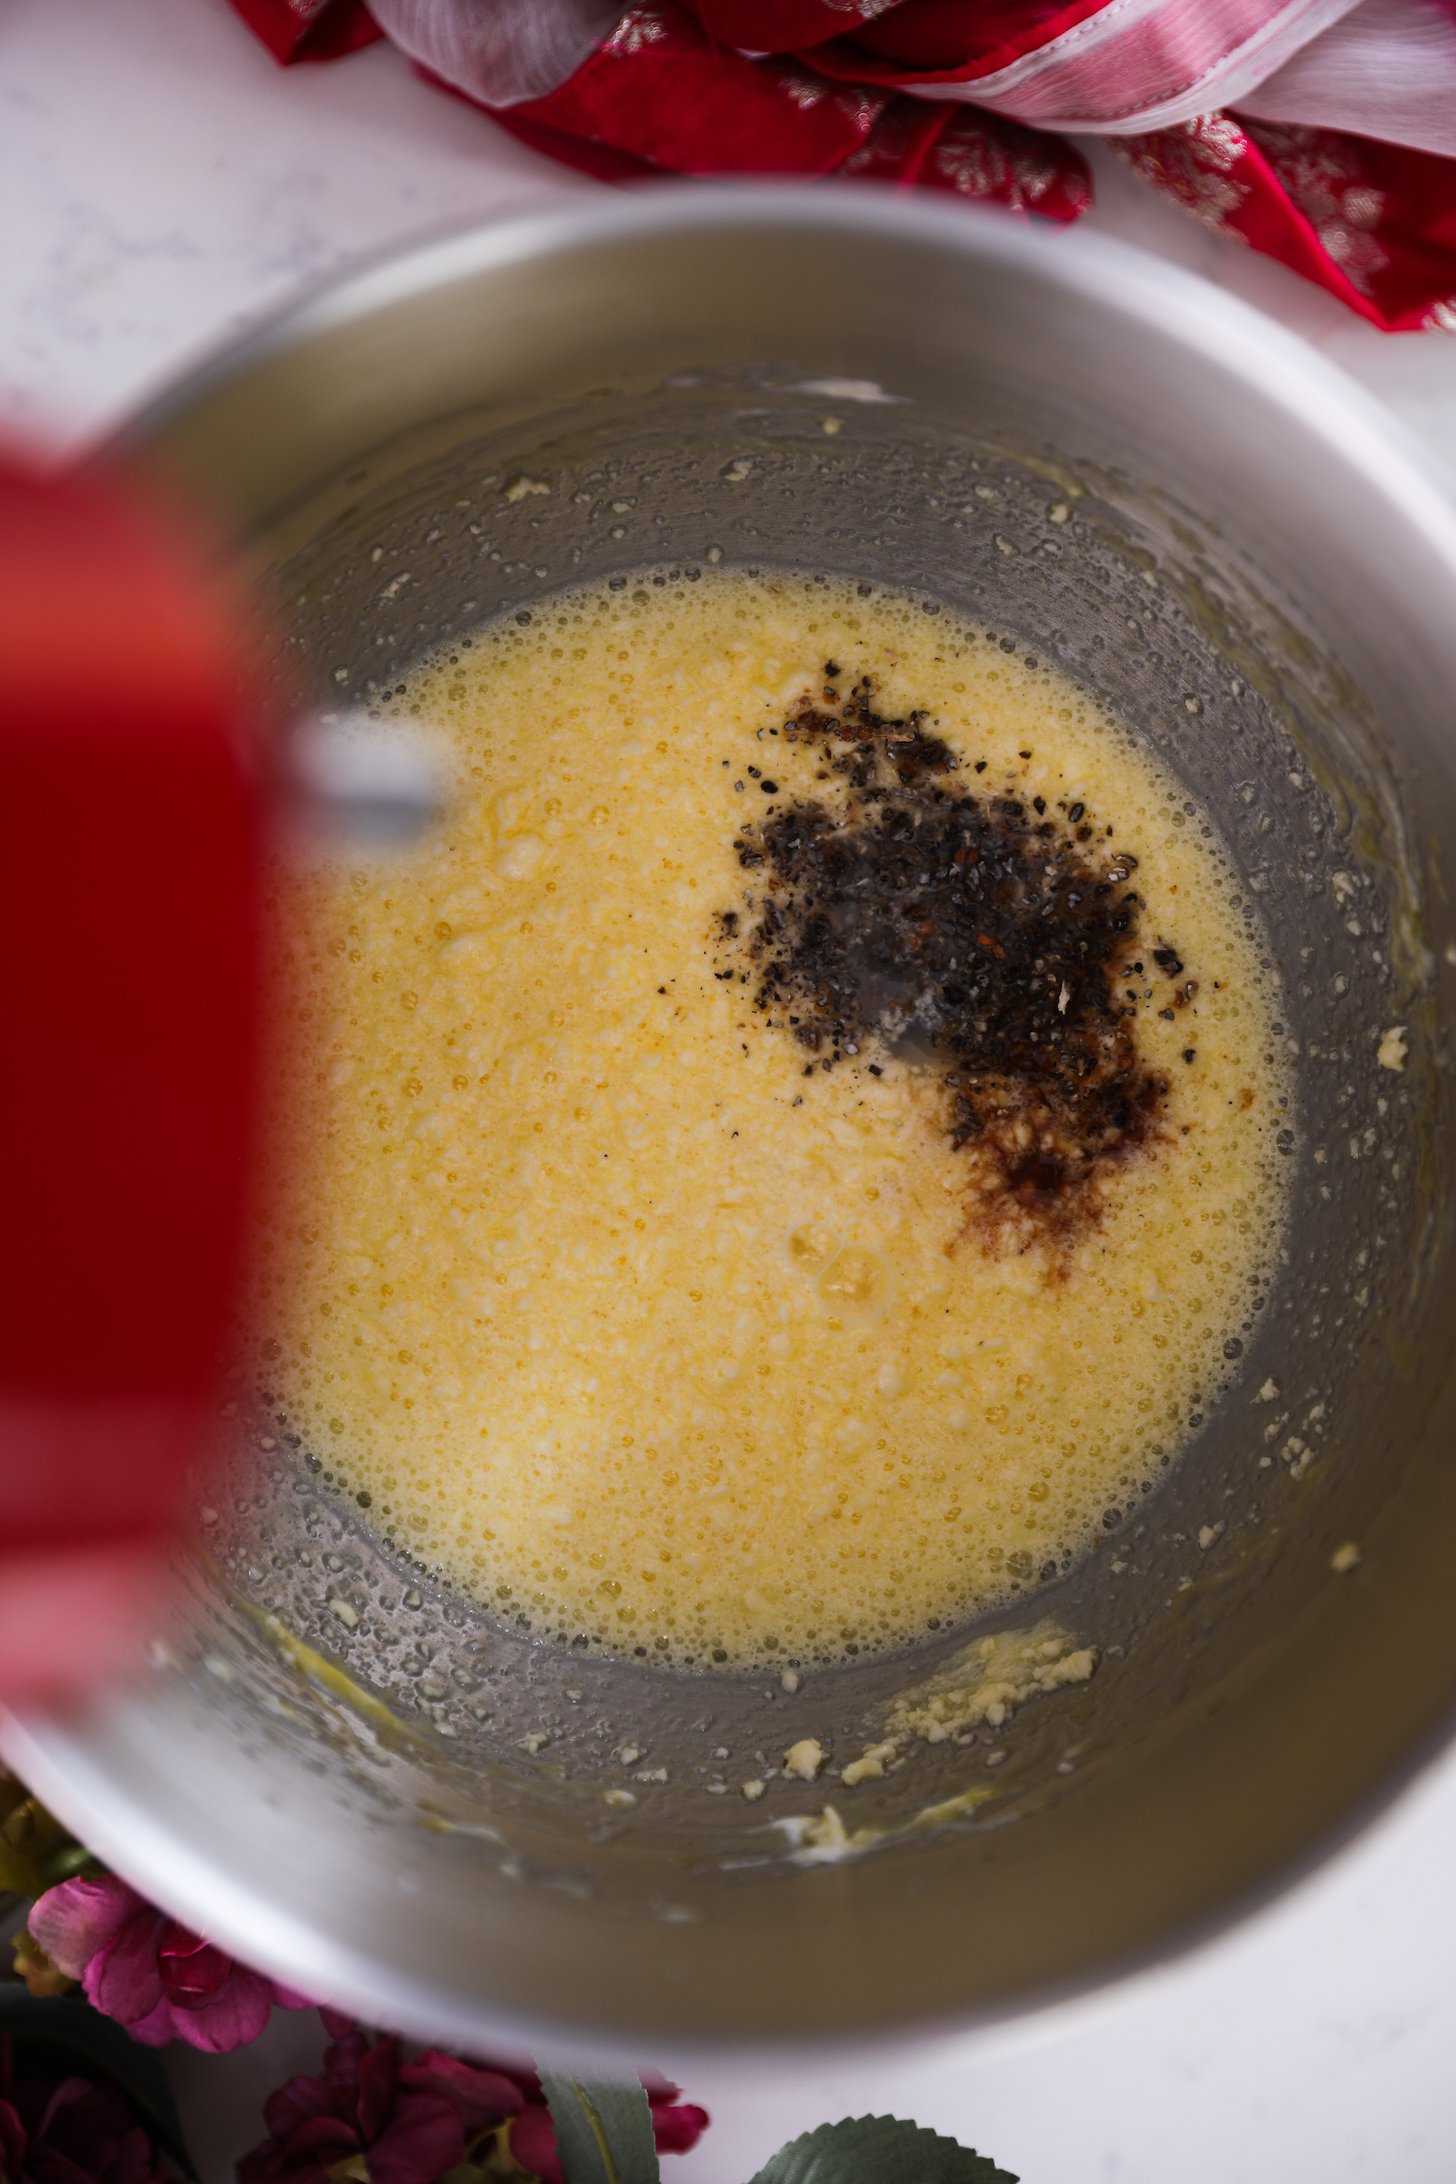 An overhead shot reveals a stand mixer bowl containing a textured, flowing yellow mixture, one area sprinkled with a dark powder.